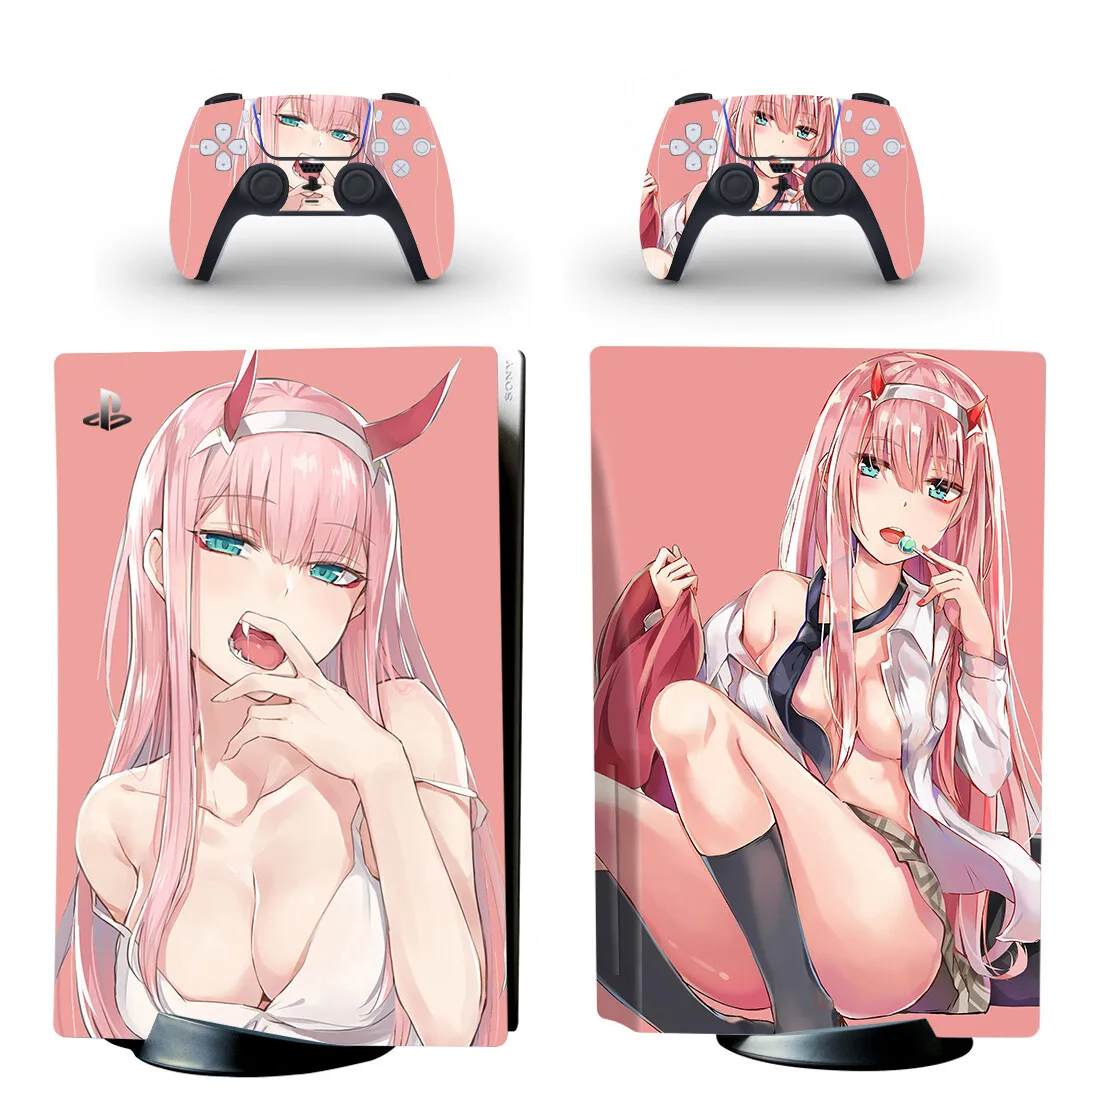 

Anime Cute Girl PS5 Disc Skin Sticker Cover for Playstation 5 Console & Controllers Decal Vinyl Protective Disk Skins